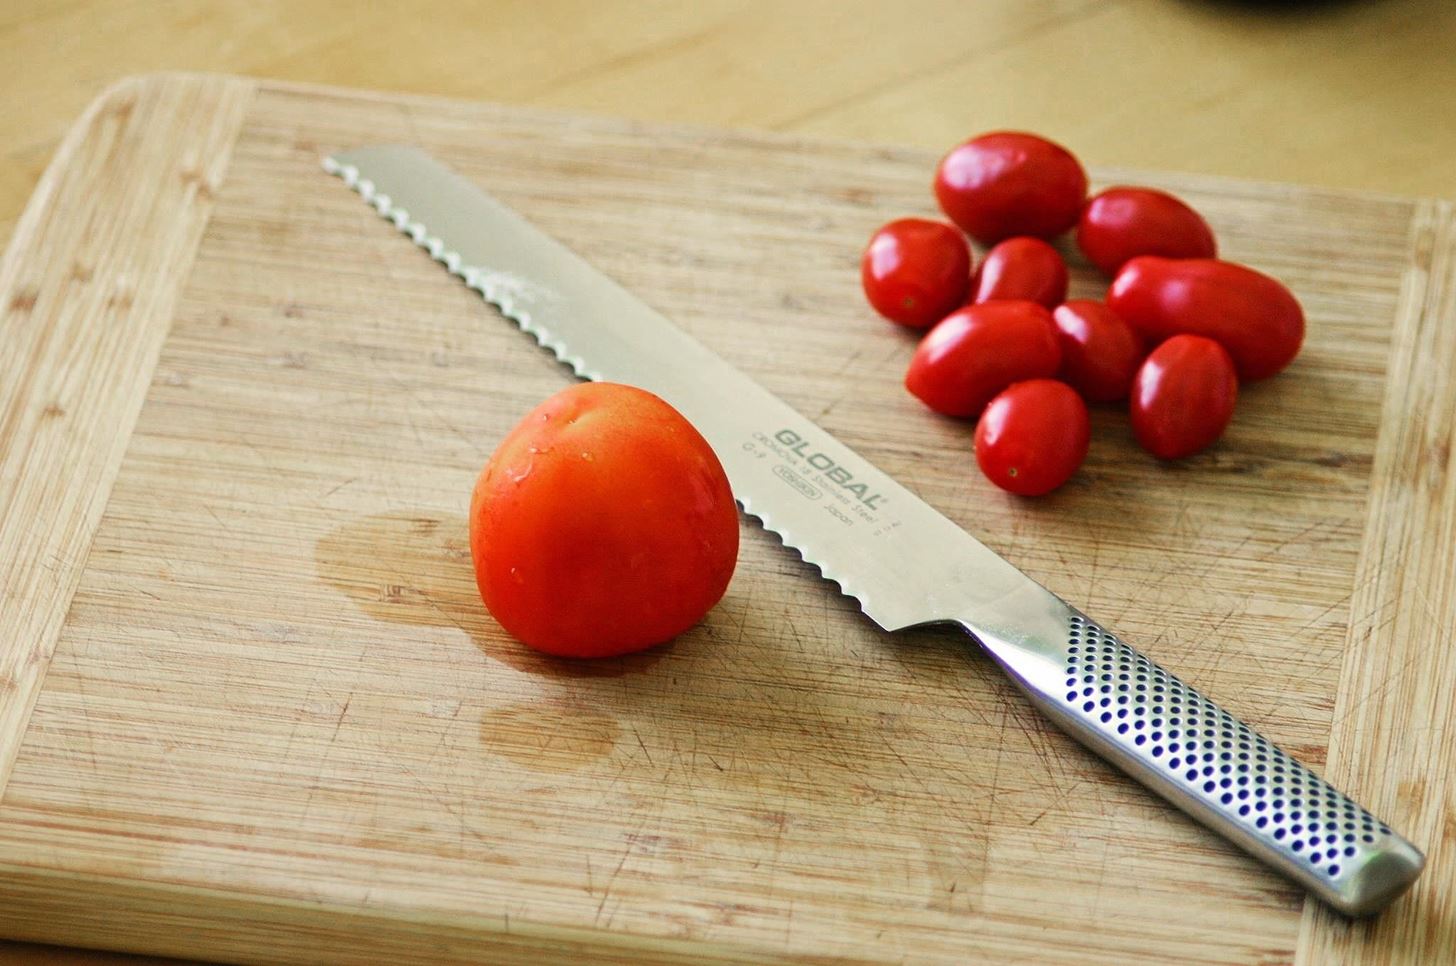 The Right Way To Cut A Tomato